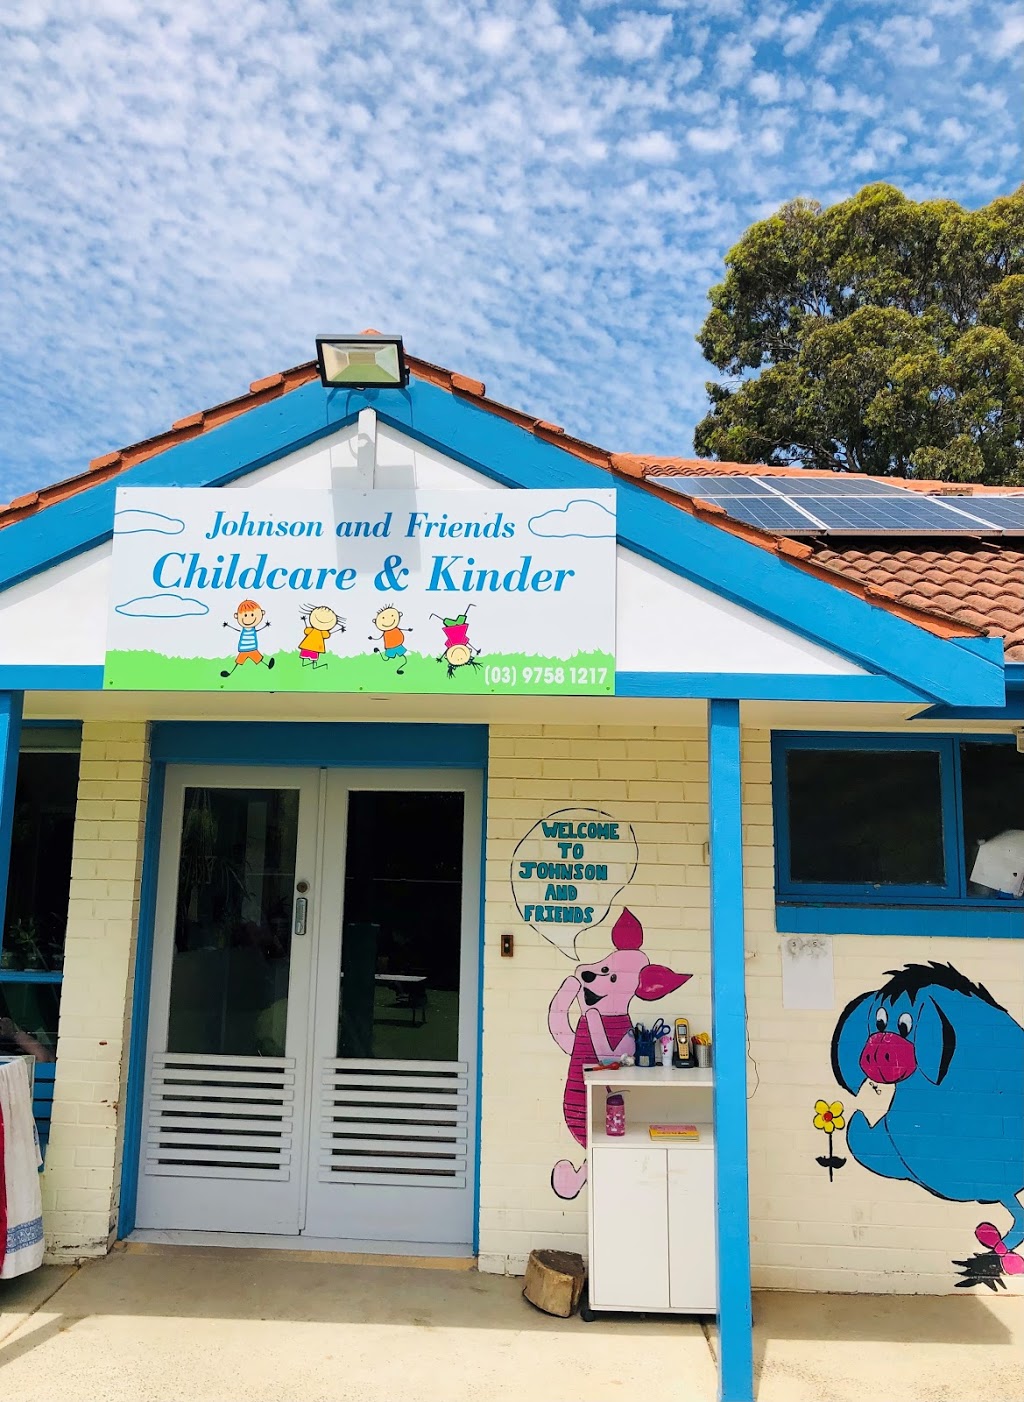 Johnson and Friends Childcare & Kinder |  | 779 Burwood Hwy, Ferntree Gully VIC 3156, Australia | 0397581217 OR +61 3 9758 1217